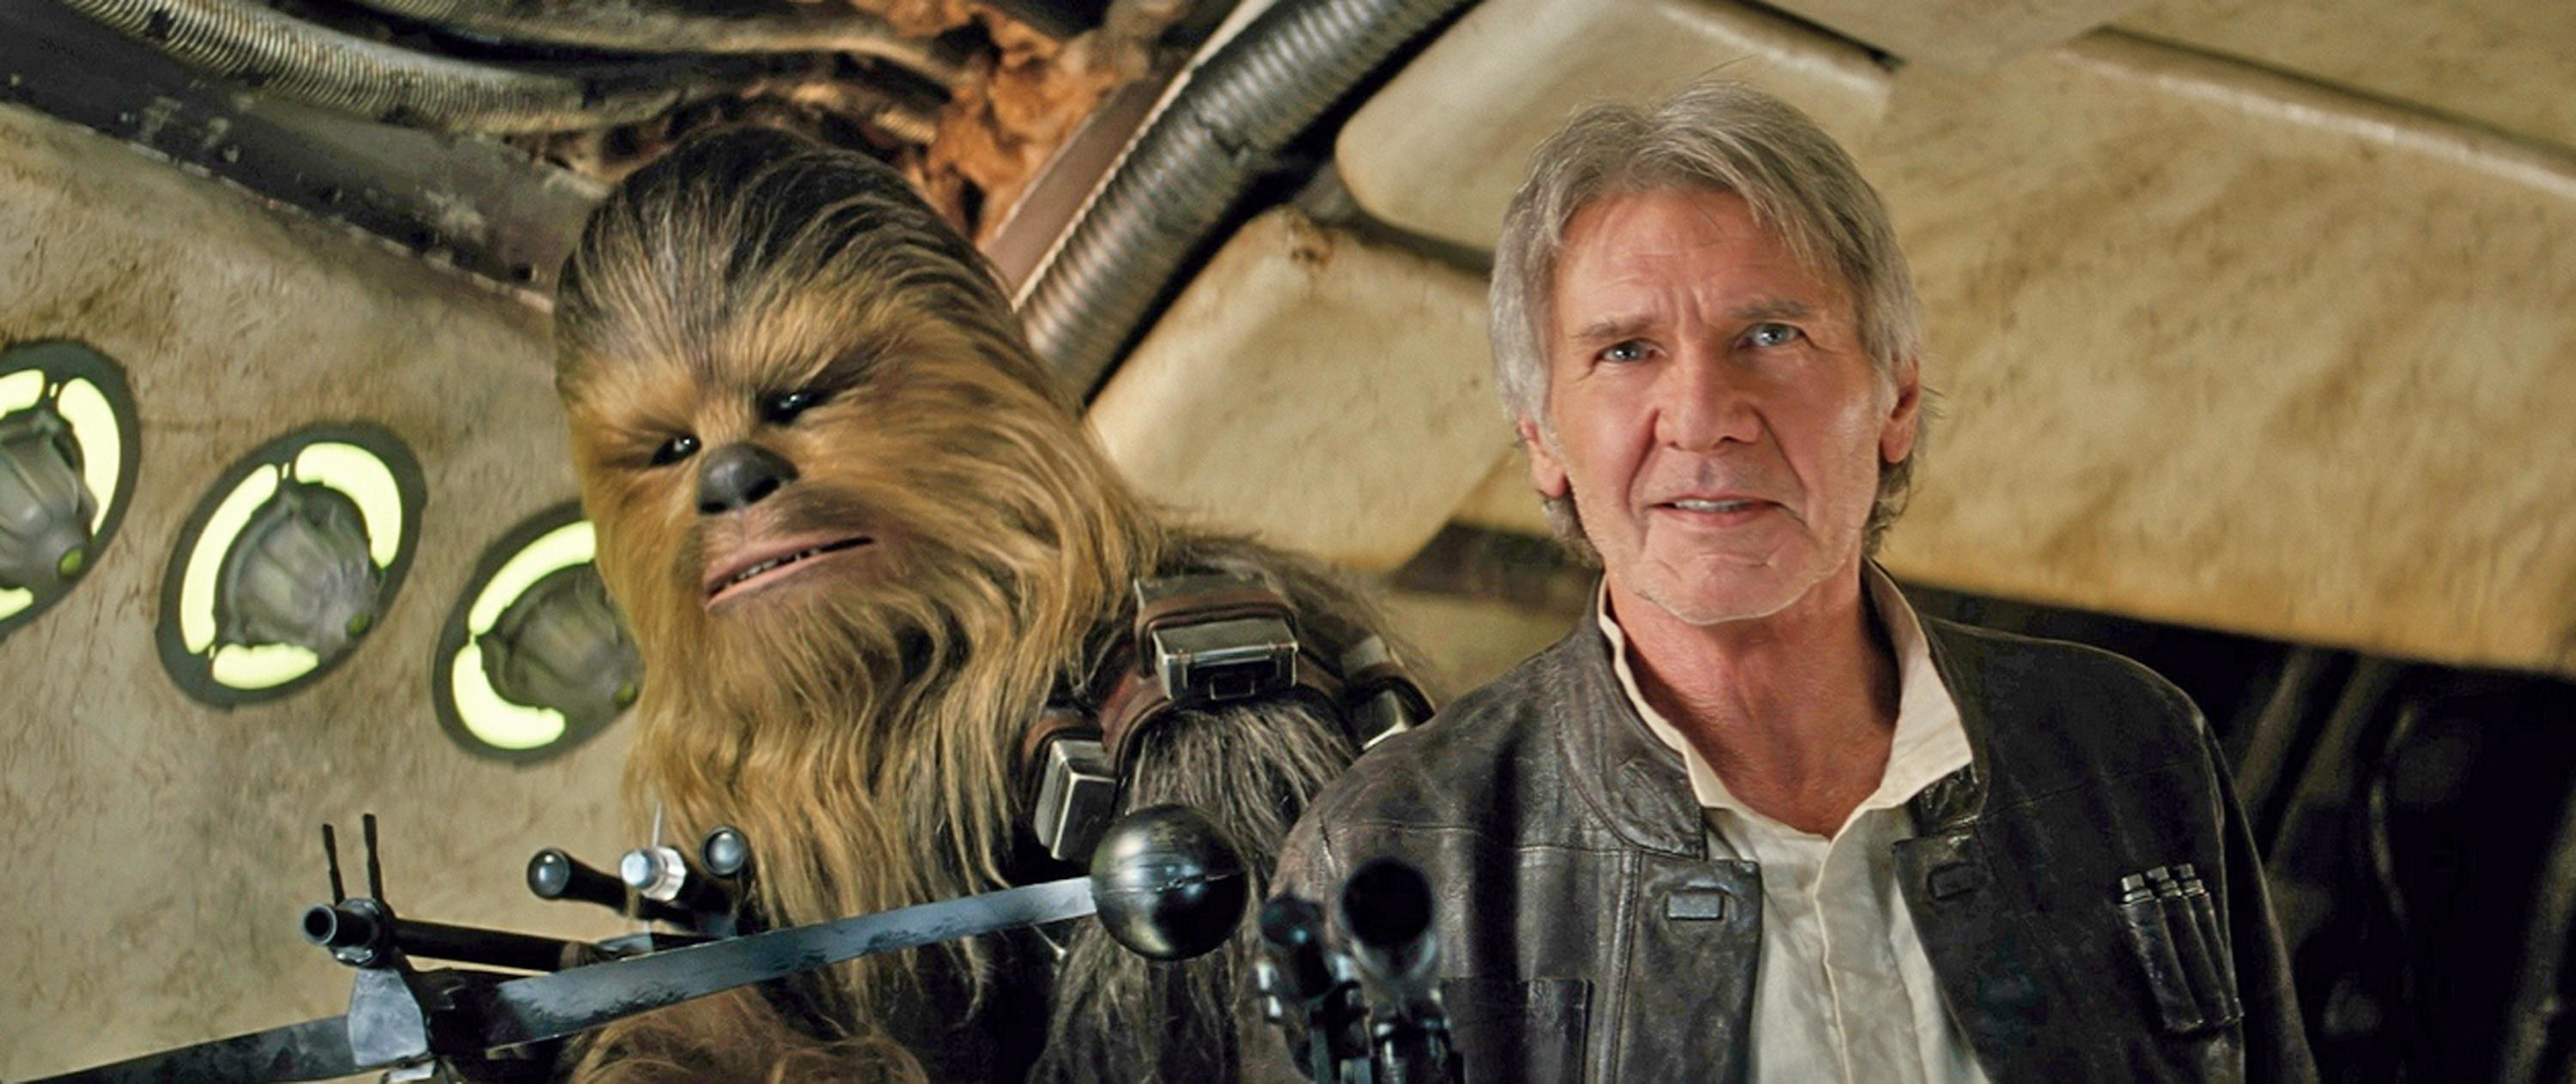 Chewbacca and an older Han Solo smile upon boarding the Millennium Falcon